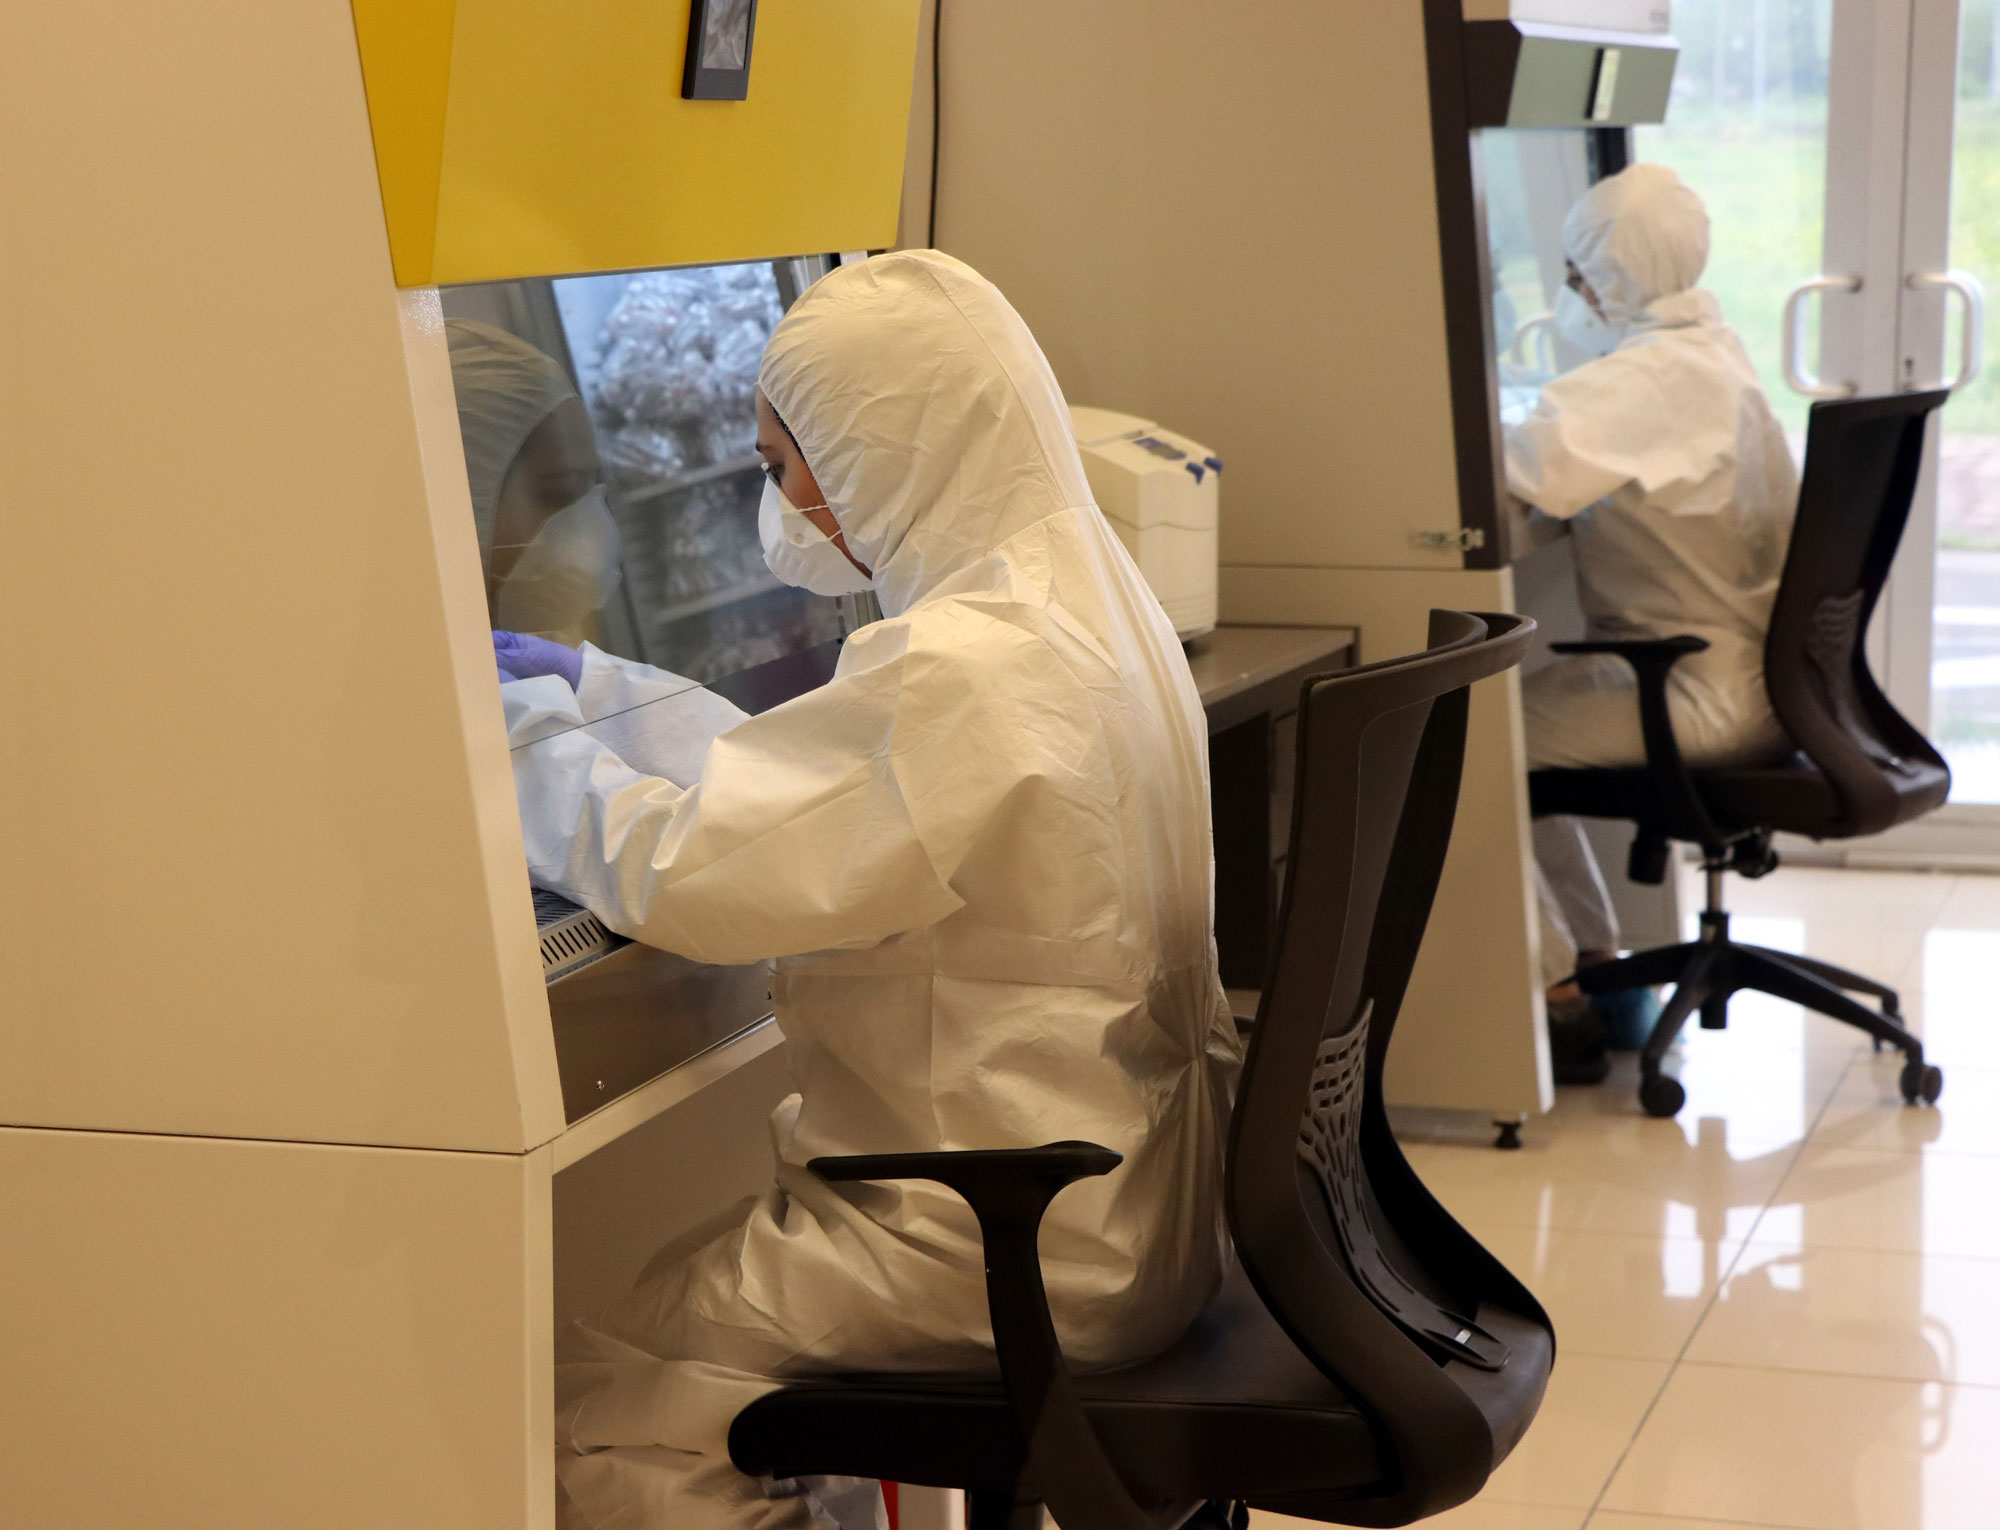 Lab employees perform testing on samples for coronavirus at a Covid-19 diagnosis center in Kocaeli, Turkey on May 5.